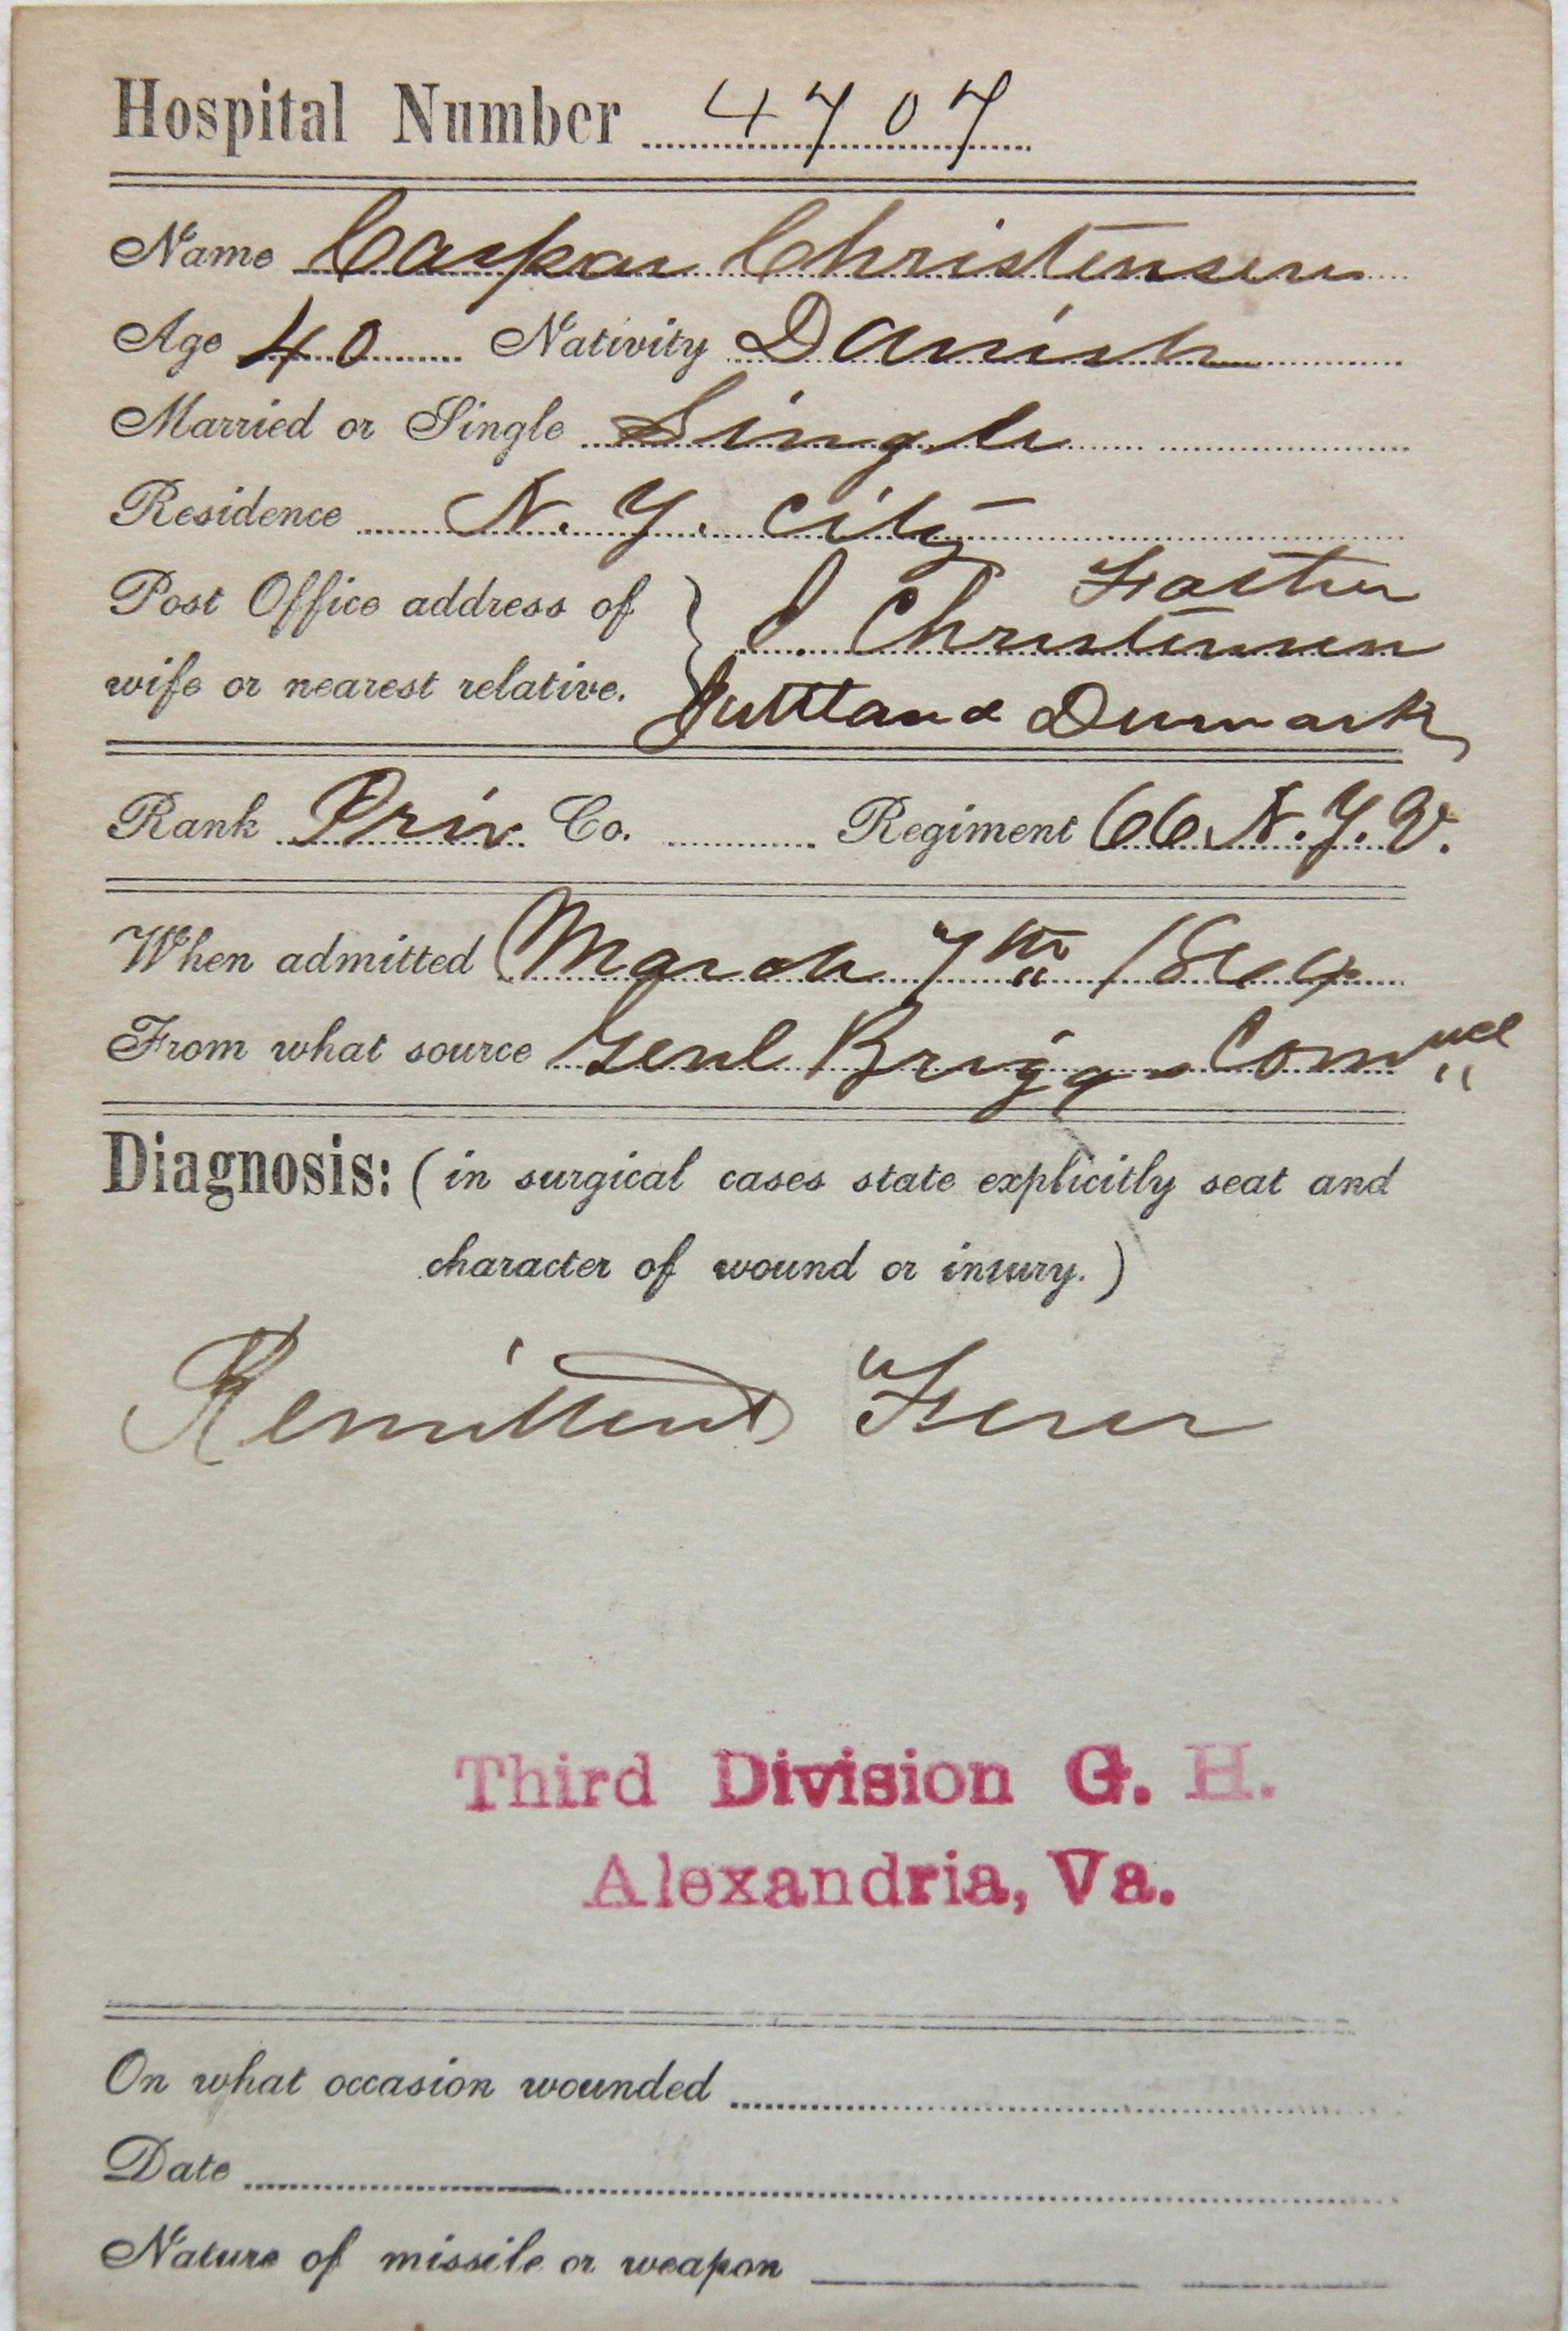 Image of a hospital bed card